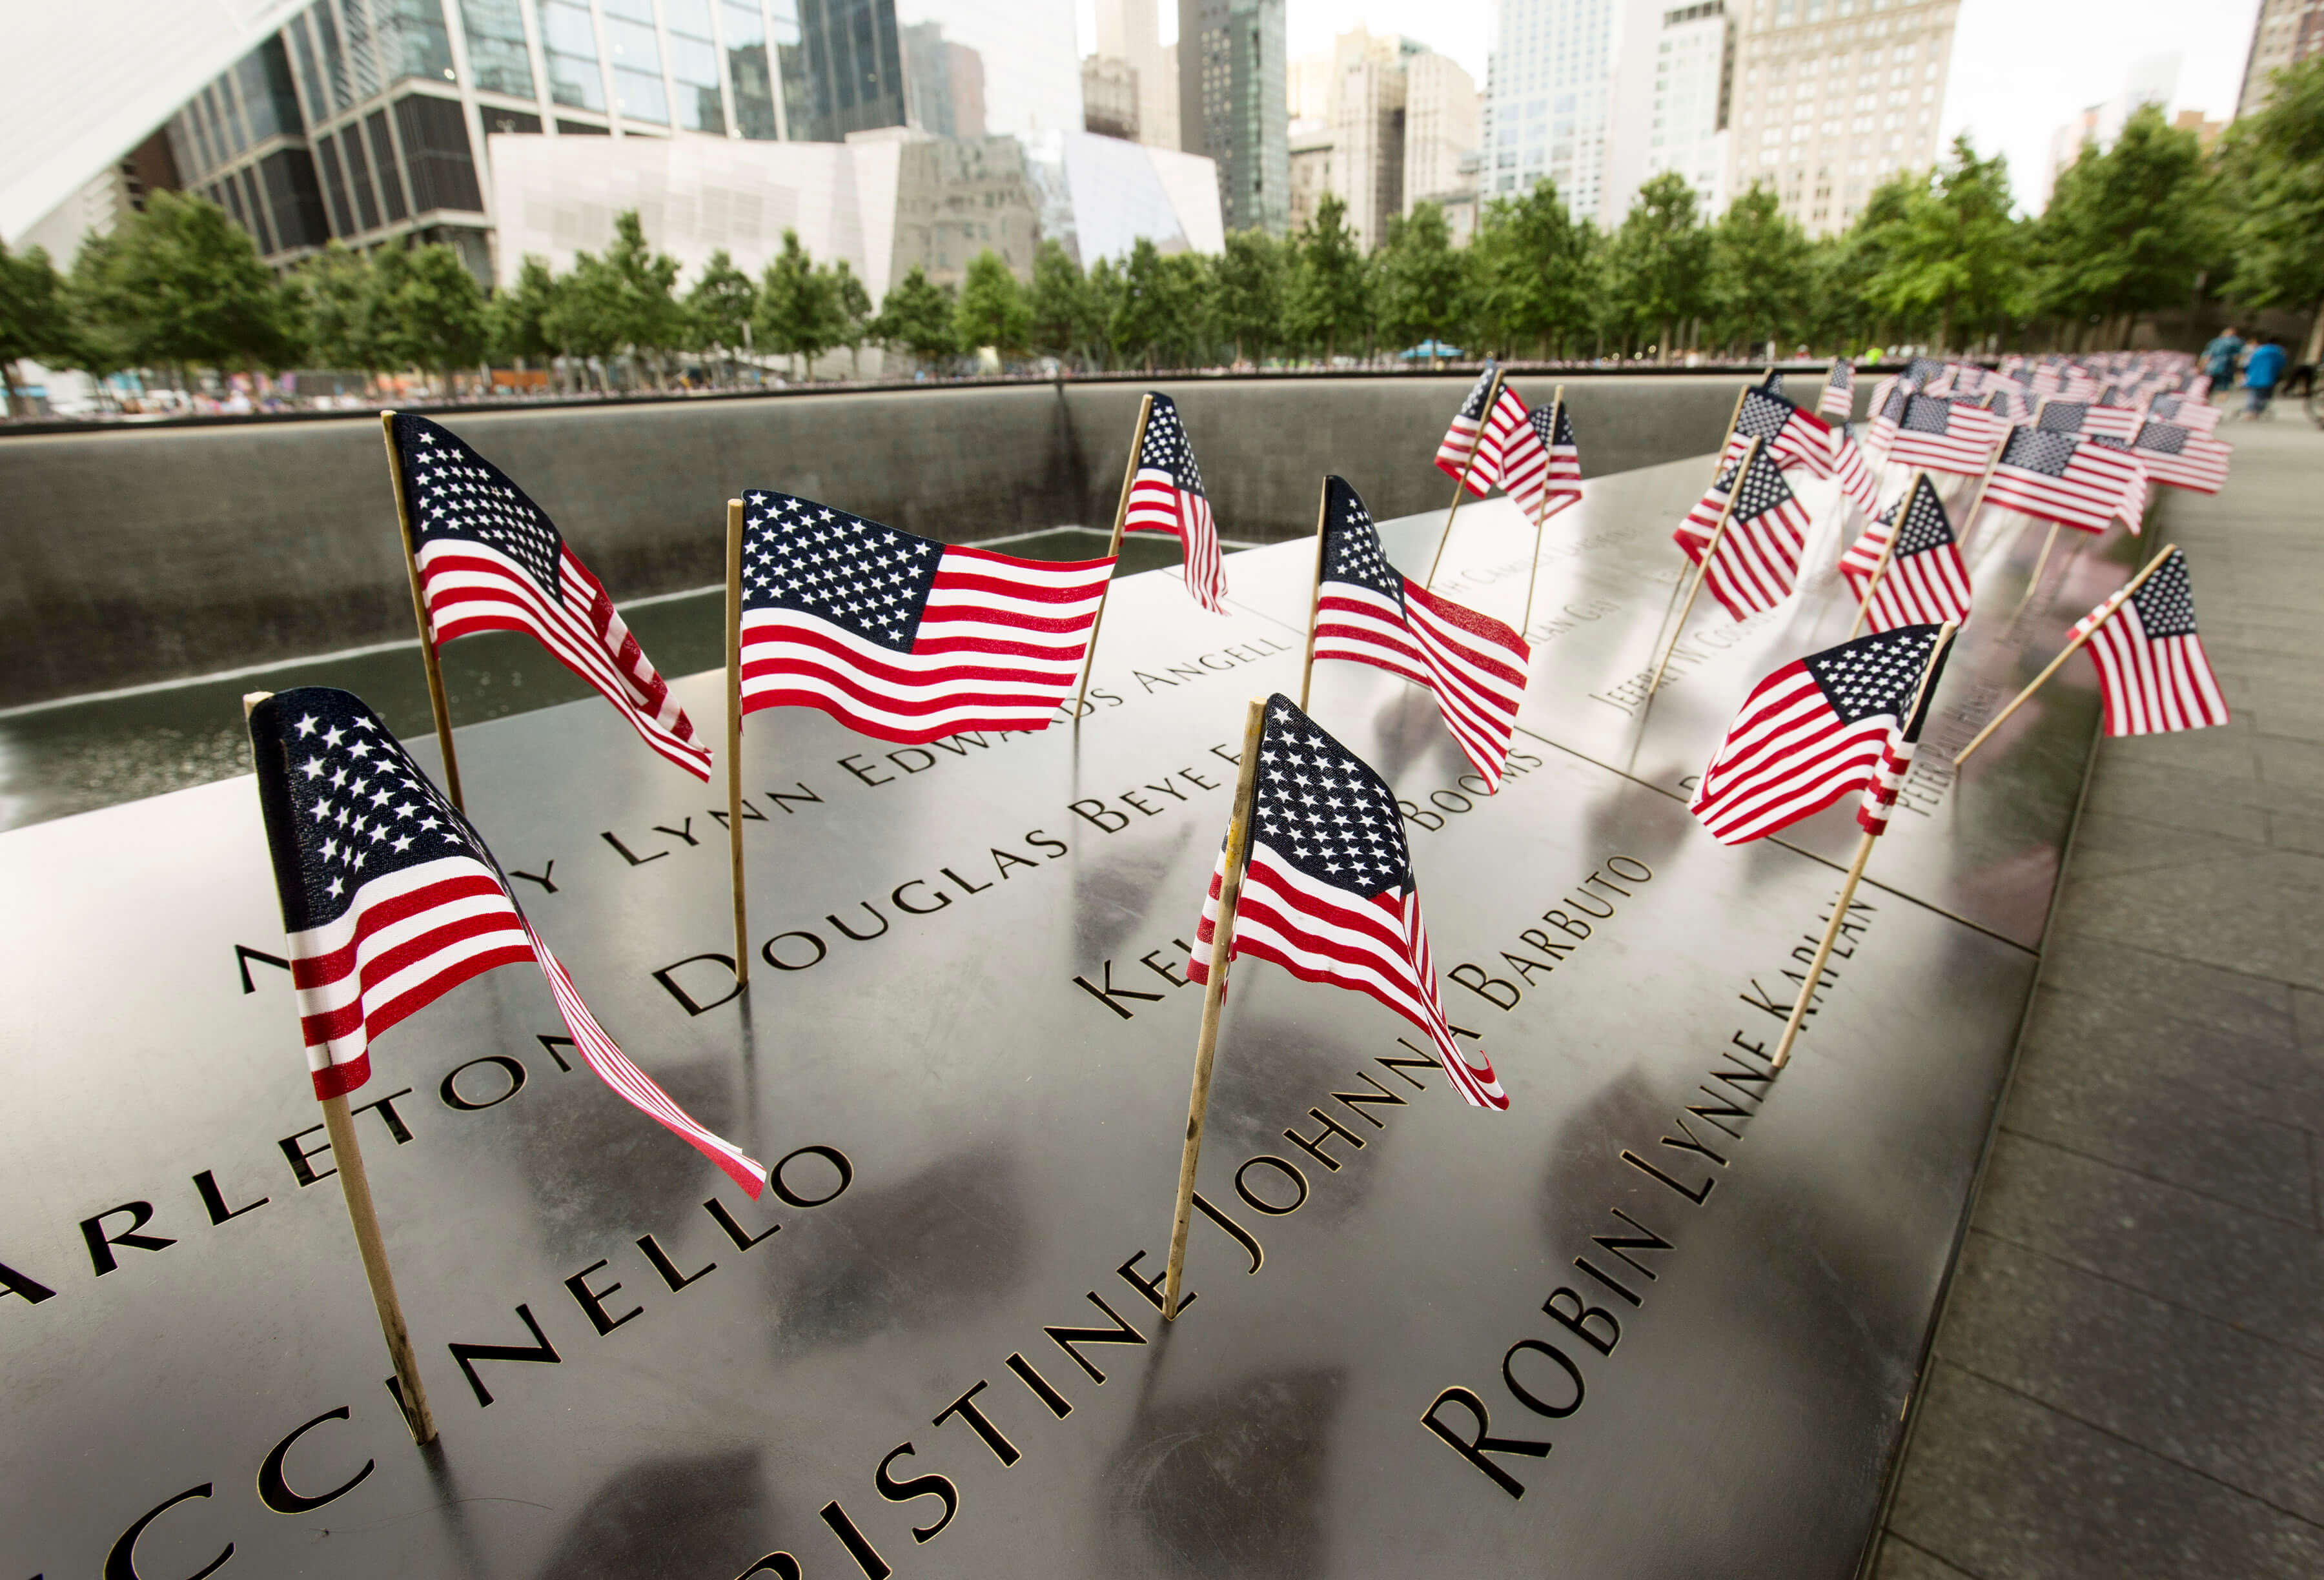 Dozens of American flags wave at the names on the bronze parapets of the Memorial. Buildings and trees are in the background.